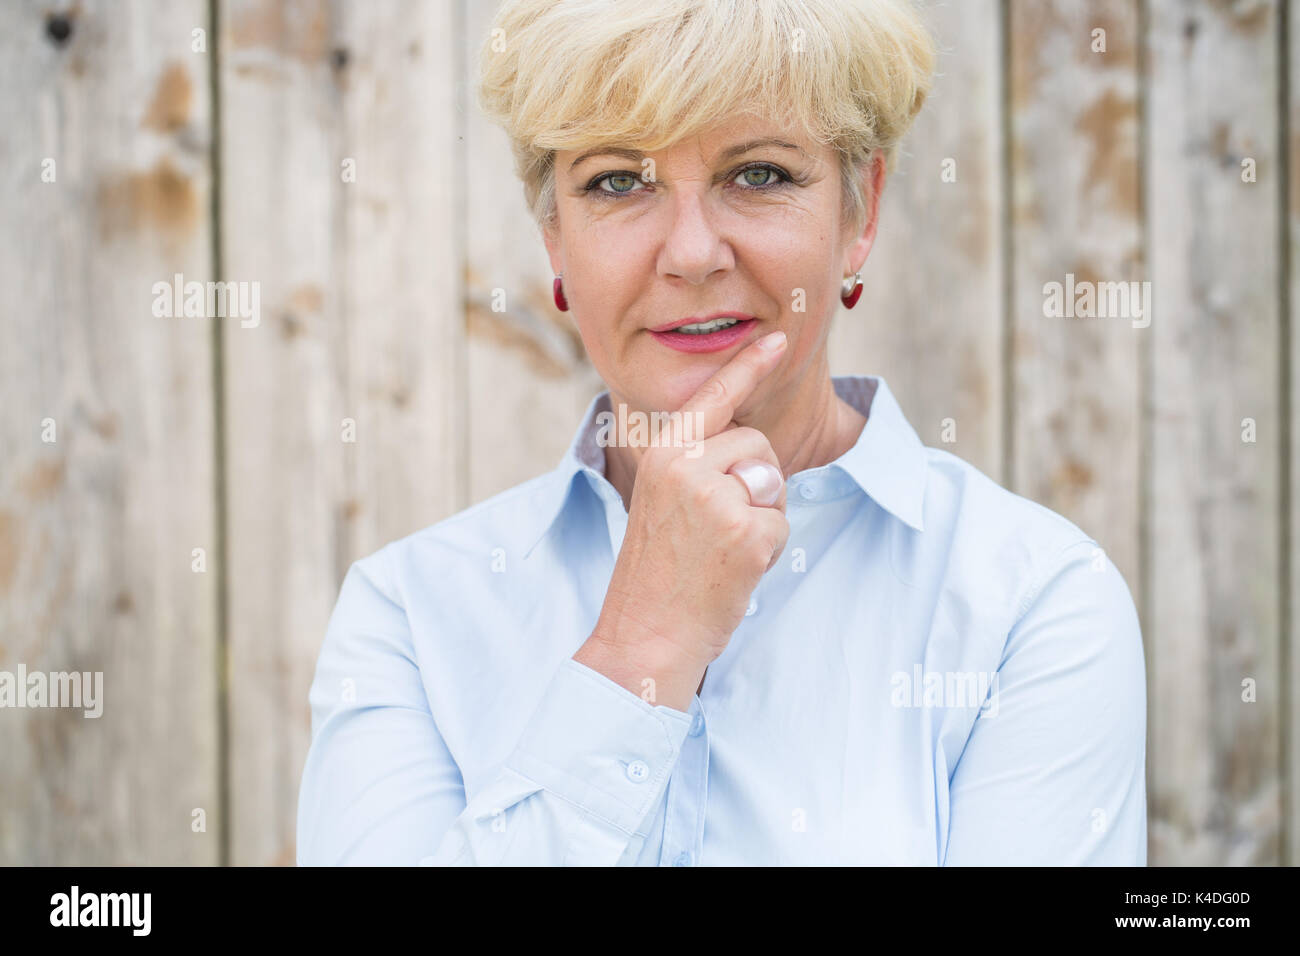 Portrait of an active senior woman looking at camera with a pens Stock Photo